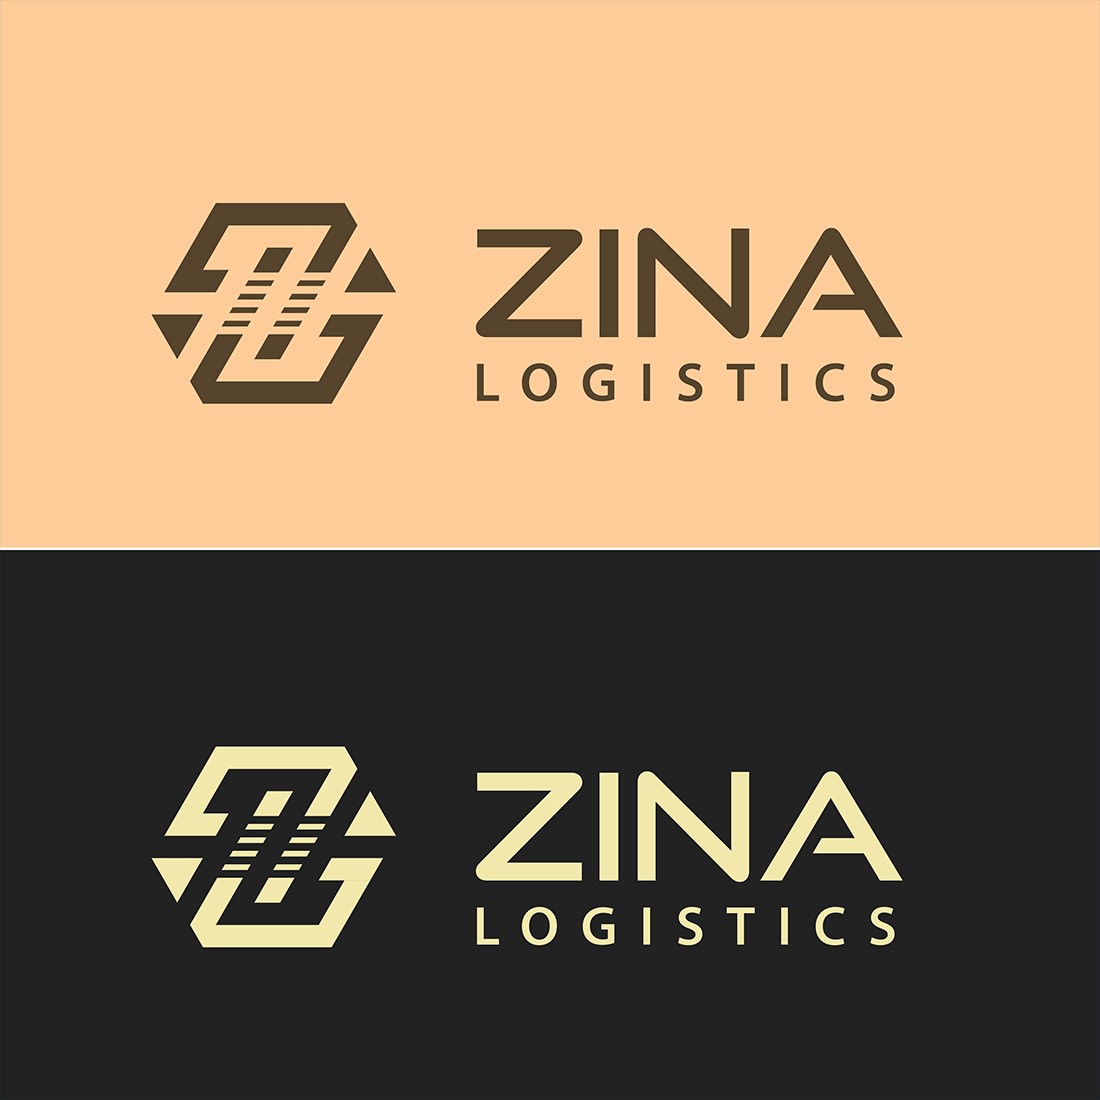 Images of gorgeous logos on light and black backgrounds.